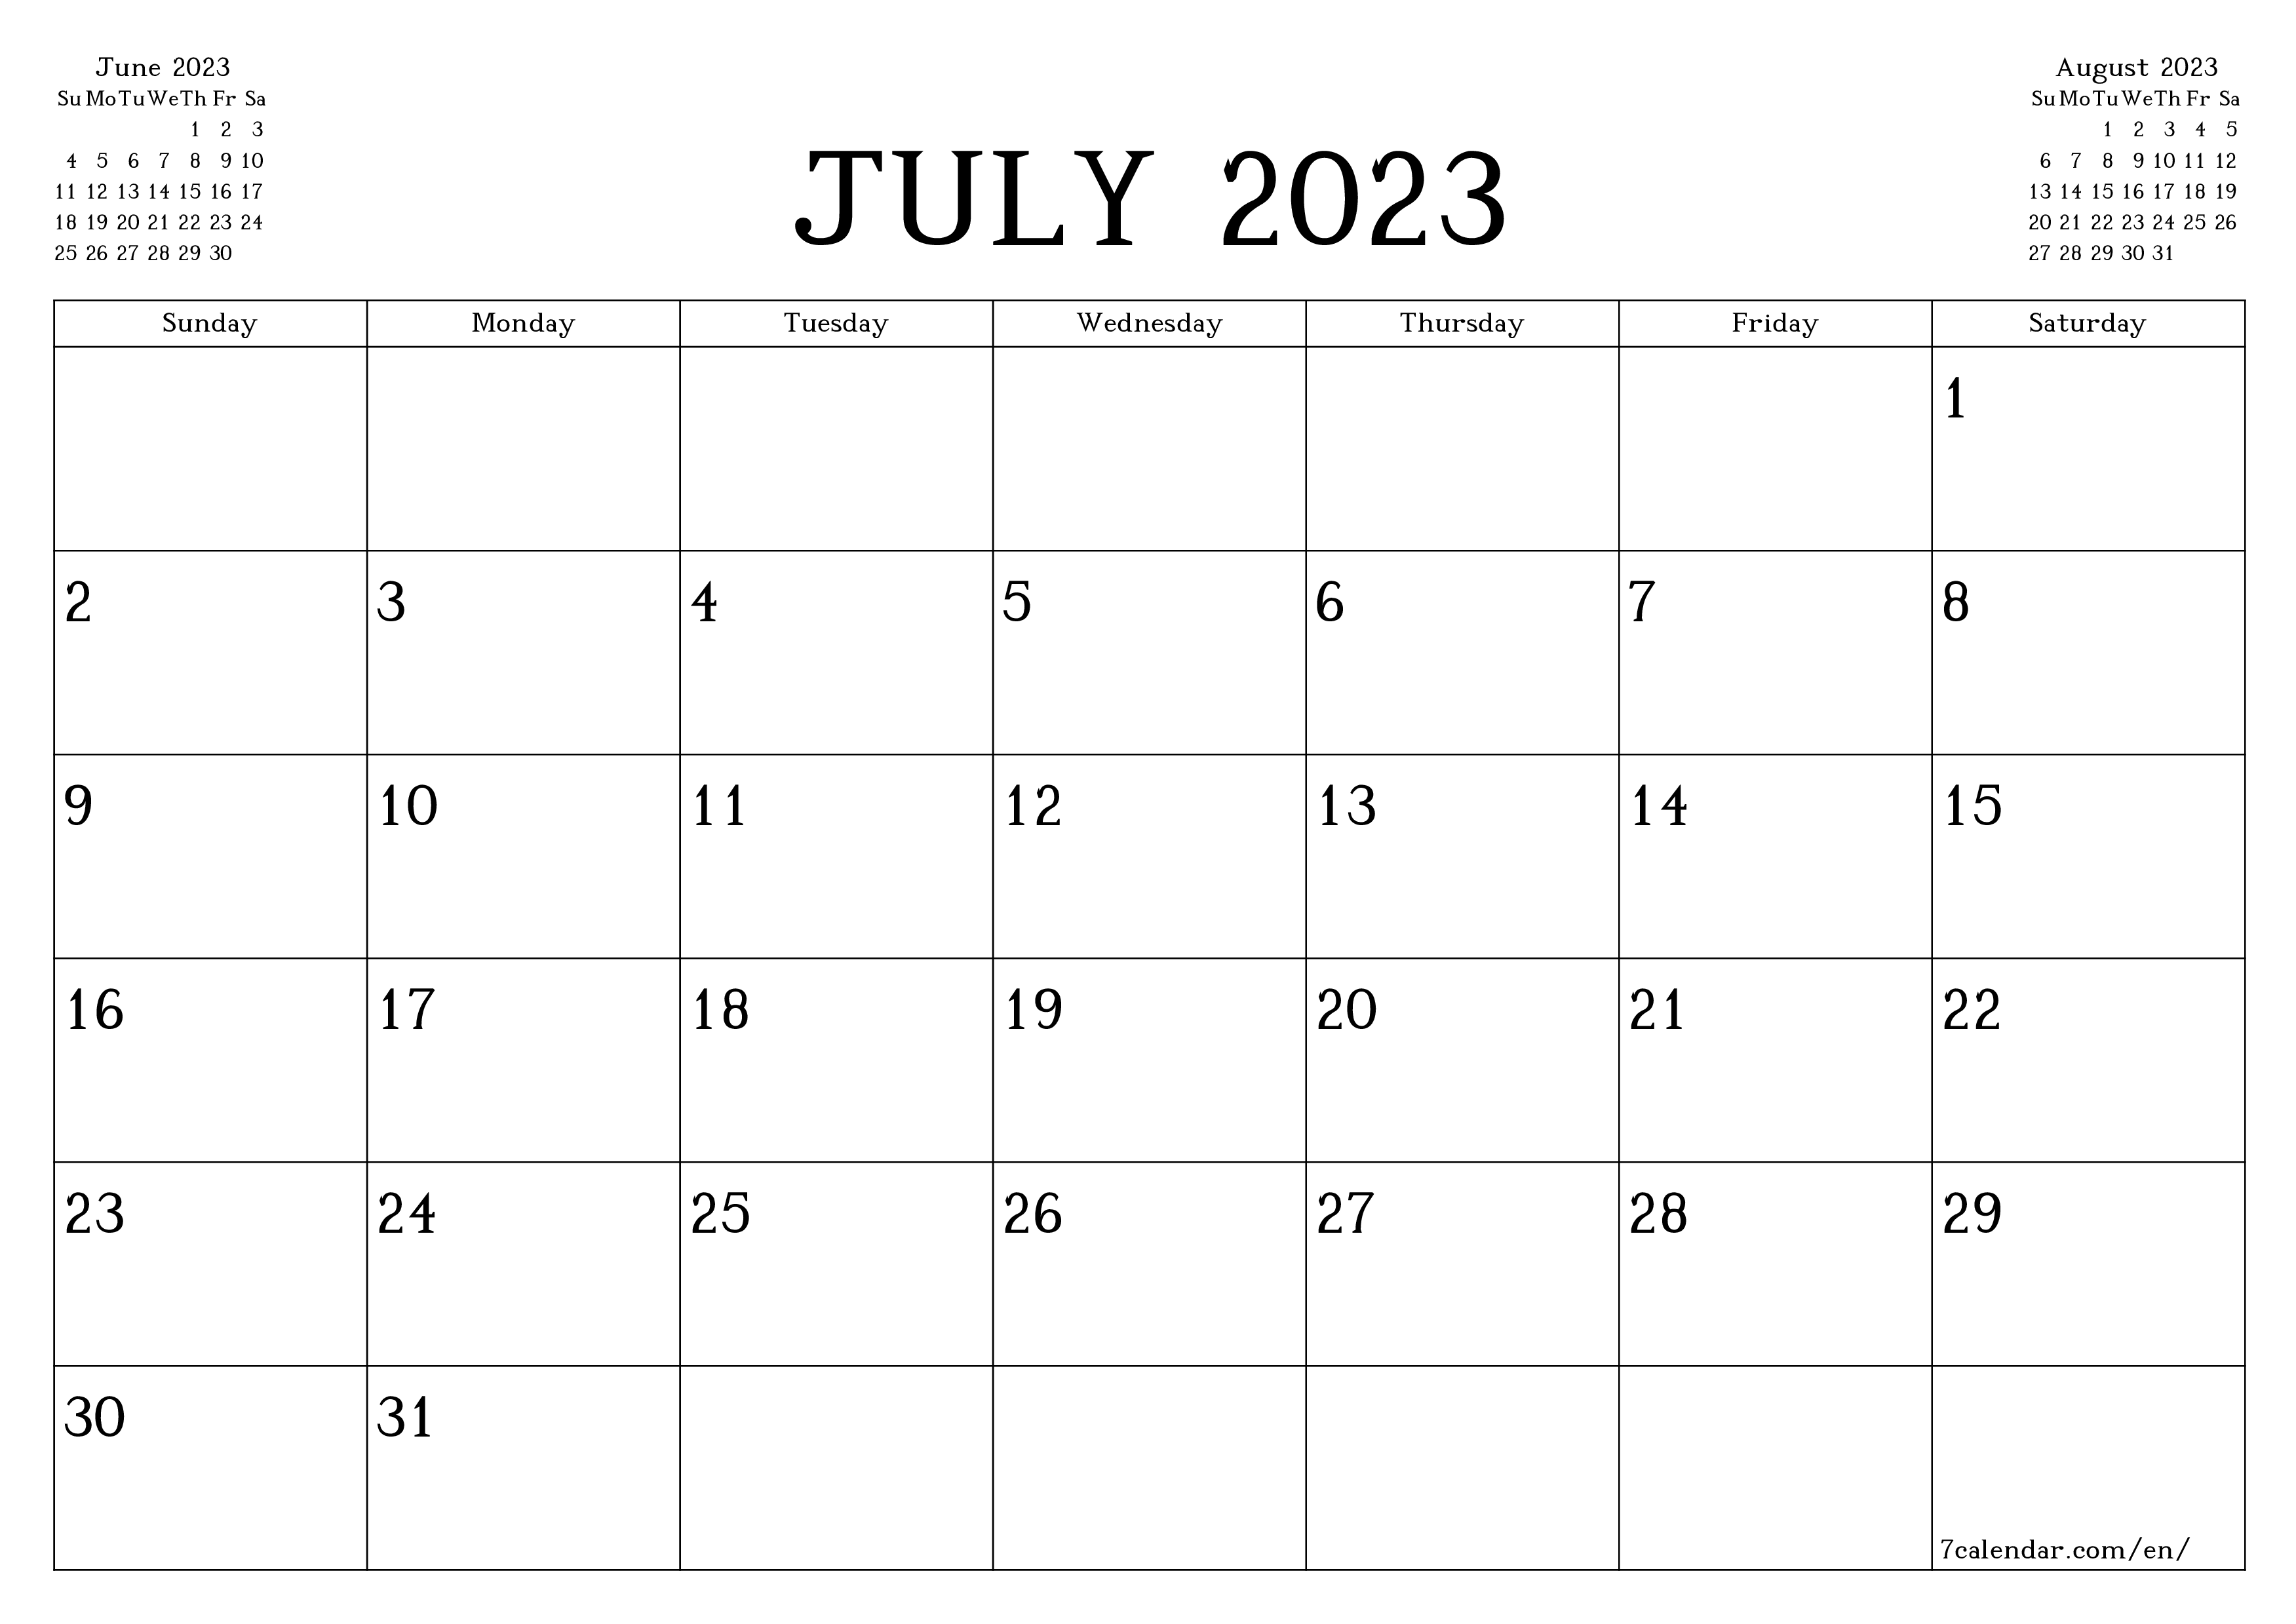 July 2023 Calendar Templates with Notes